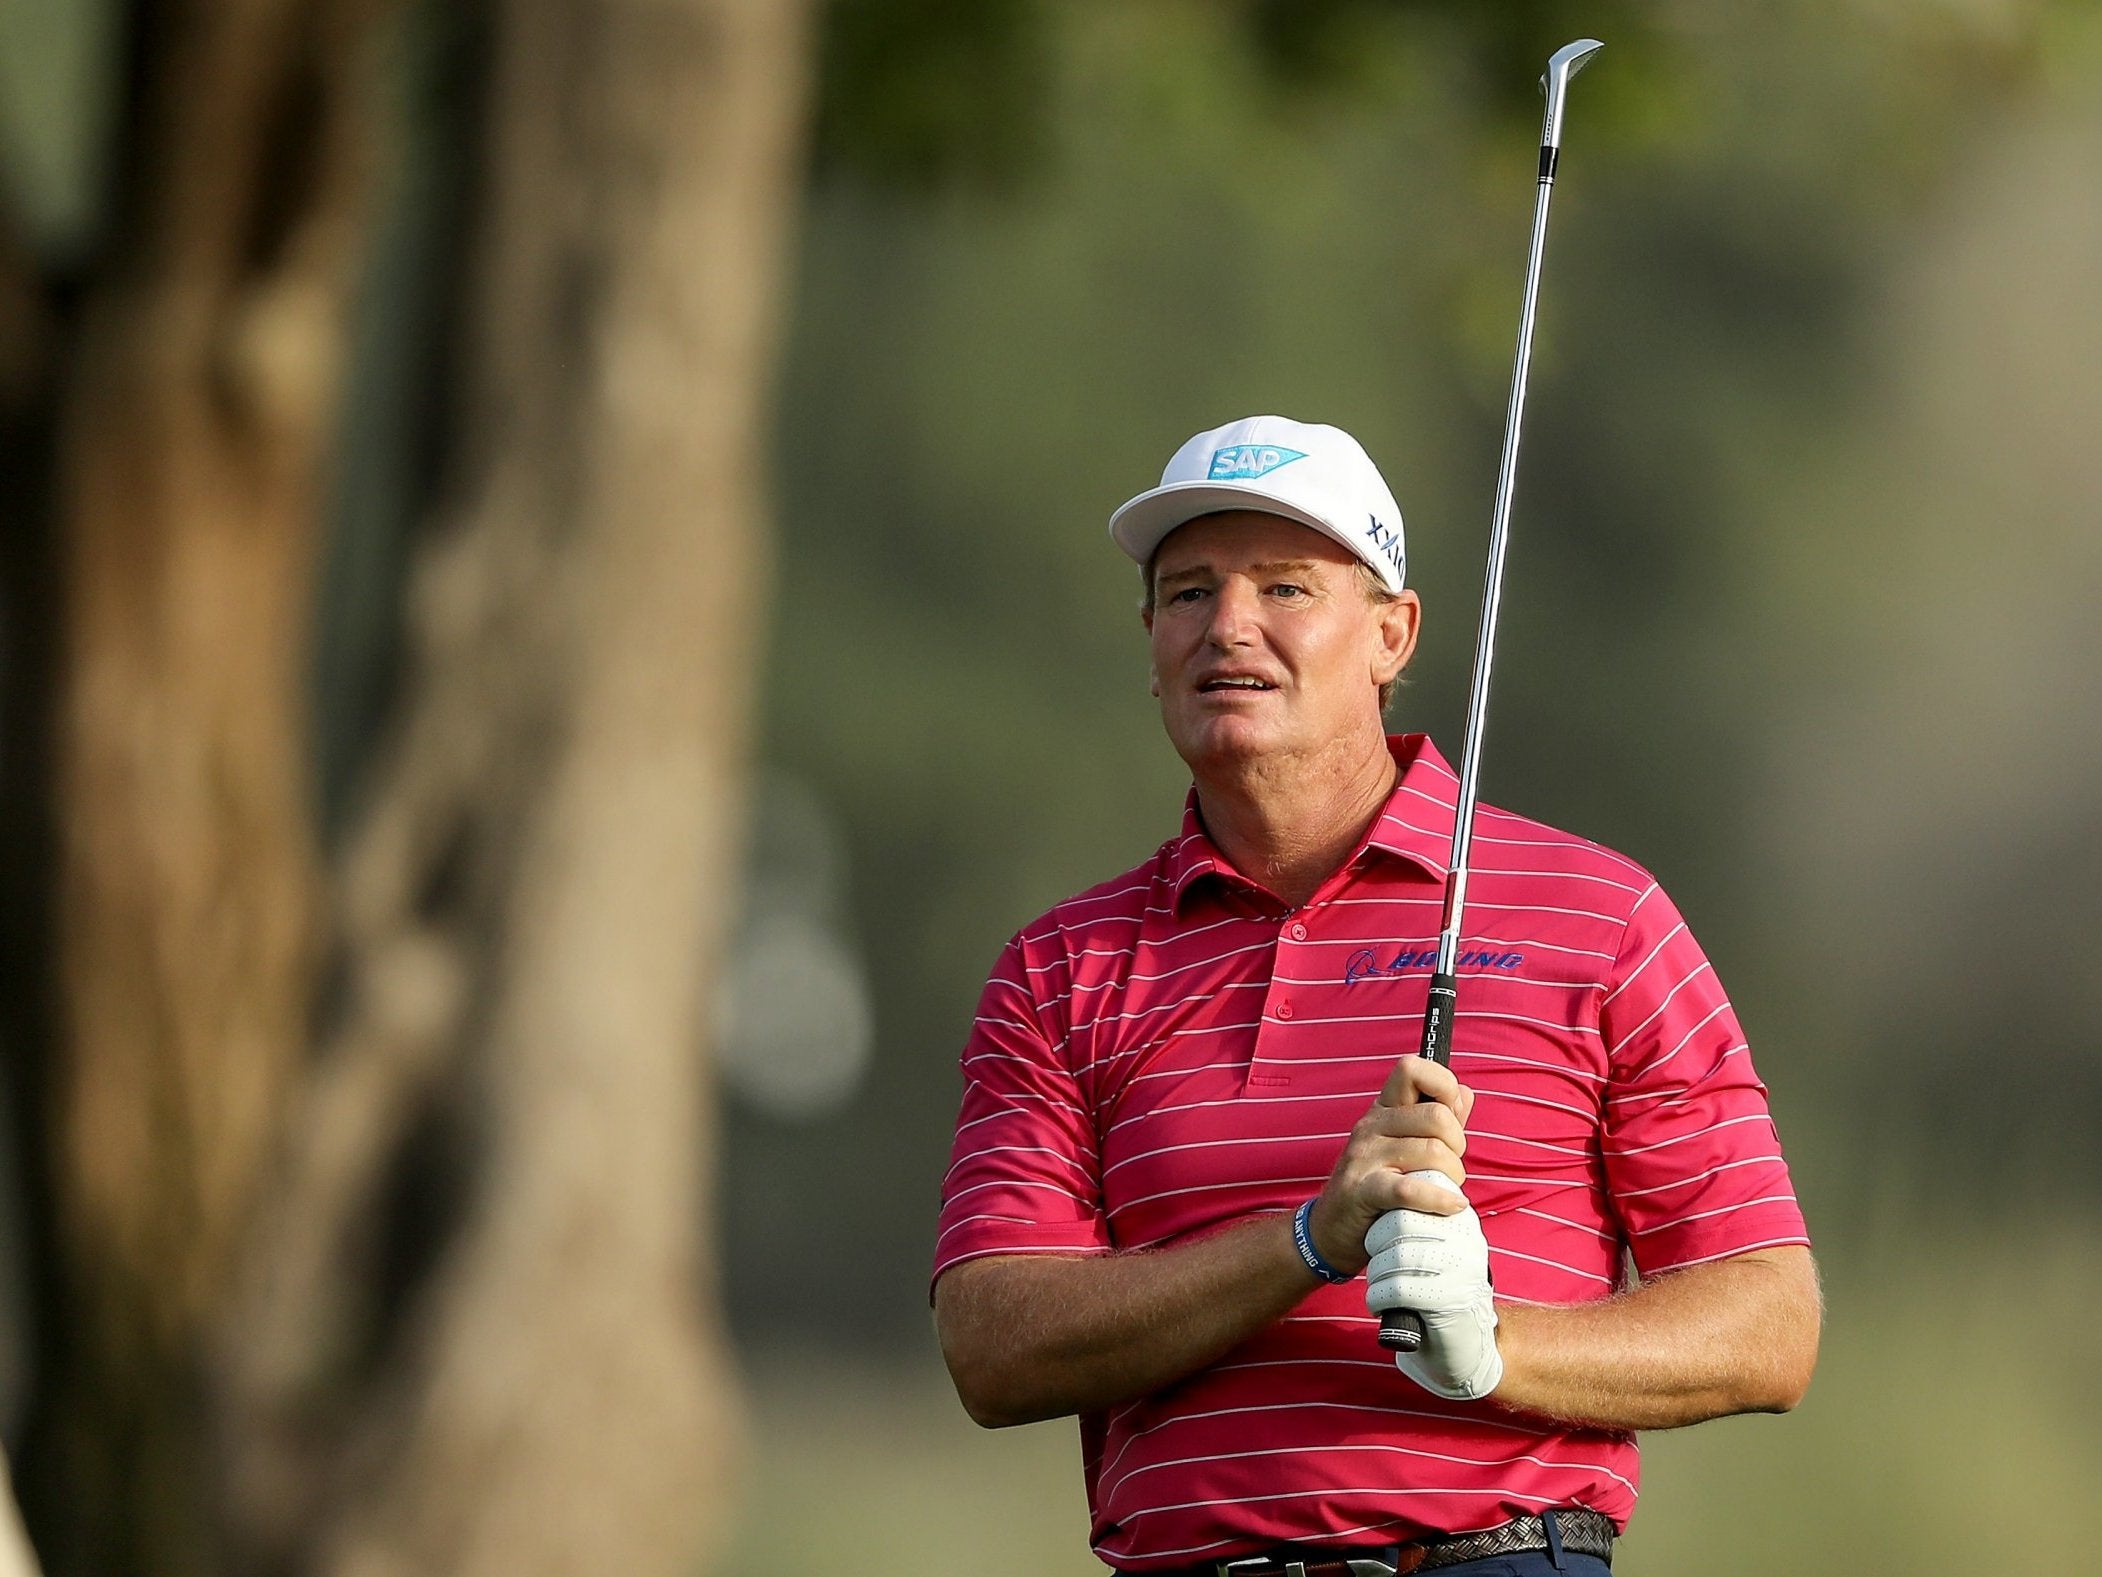 The South African shot a seven-under-par 65 on Friday